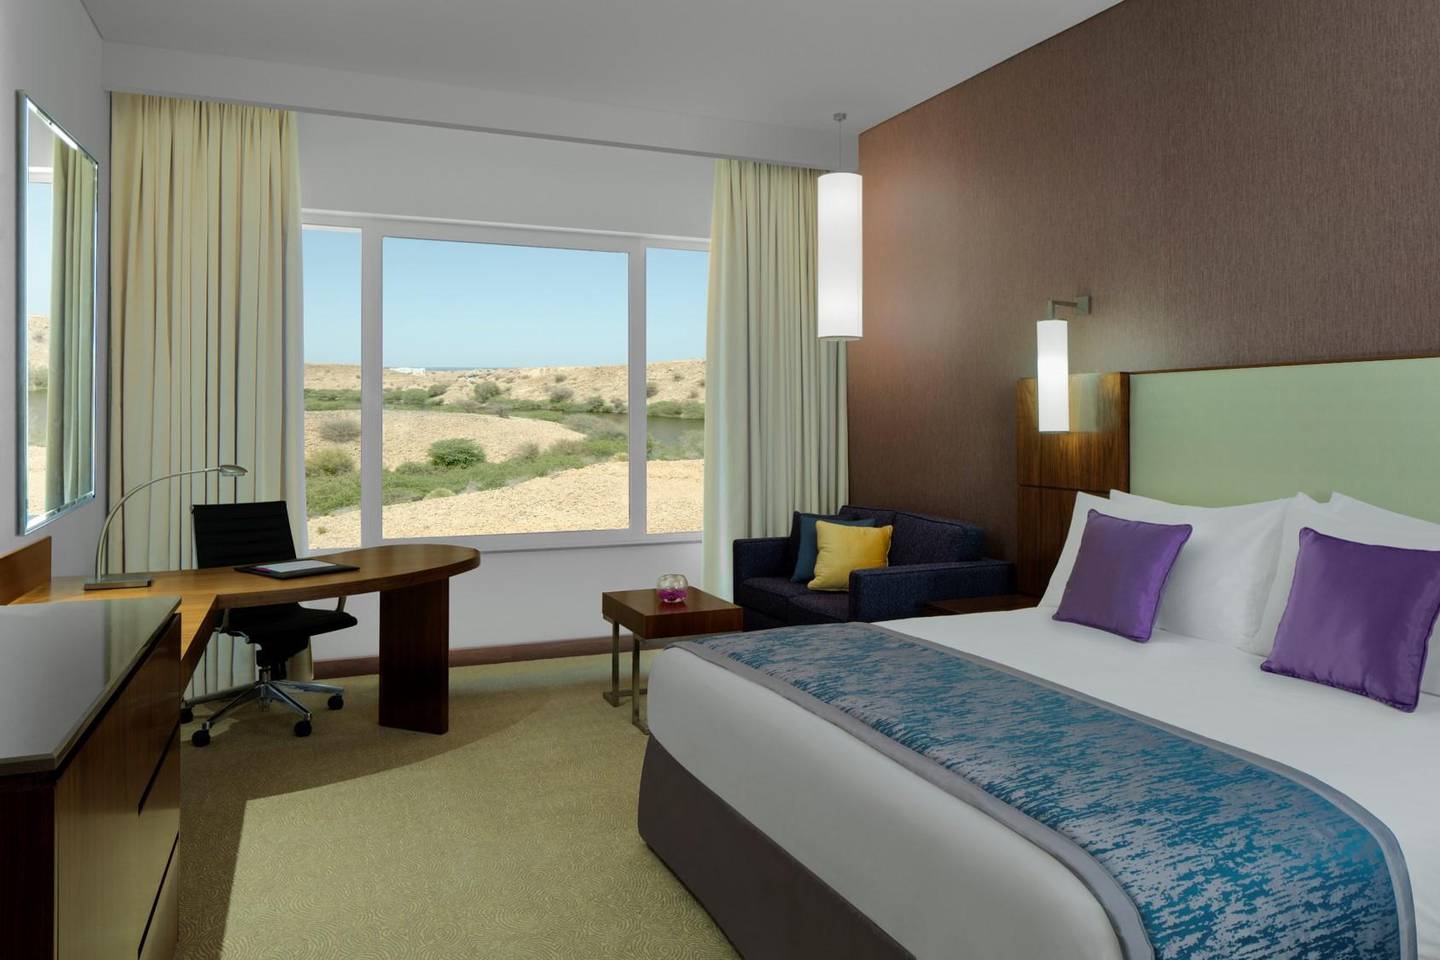 A room at the new Crowne Plaza Muscat